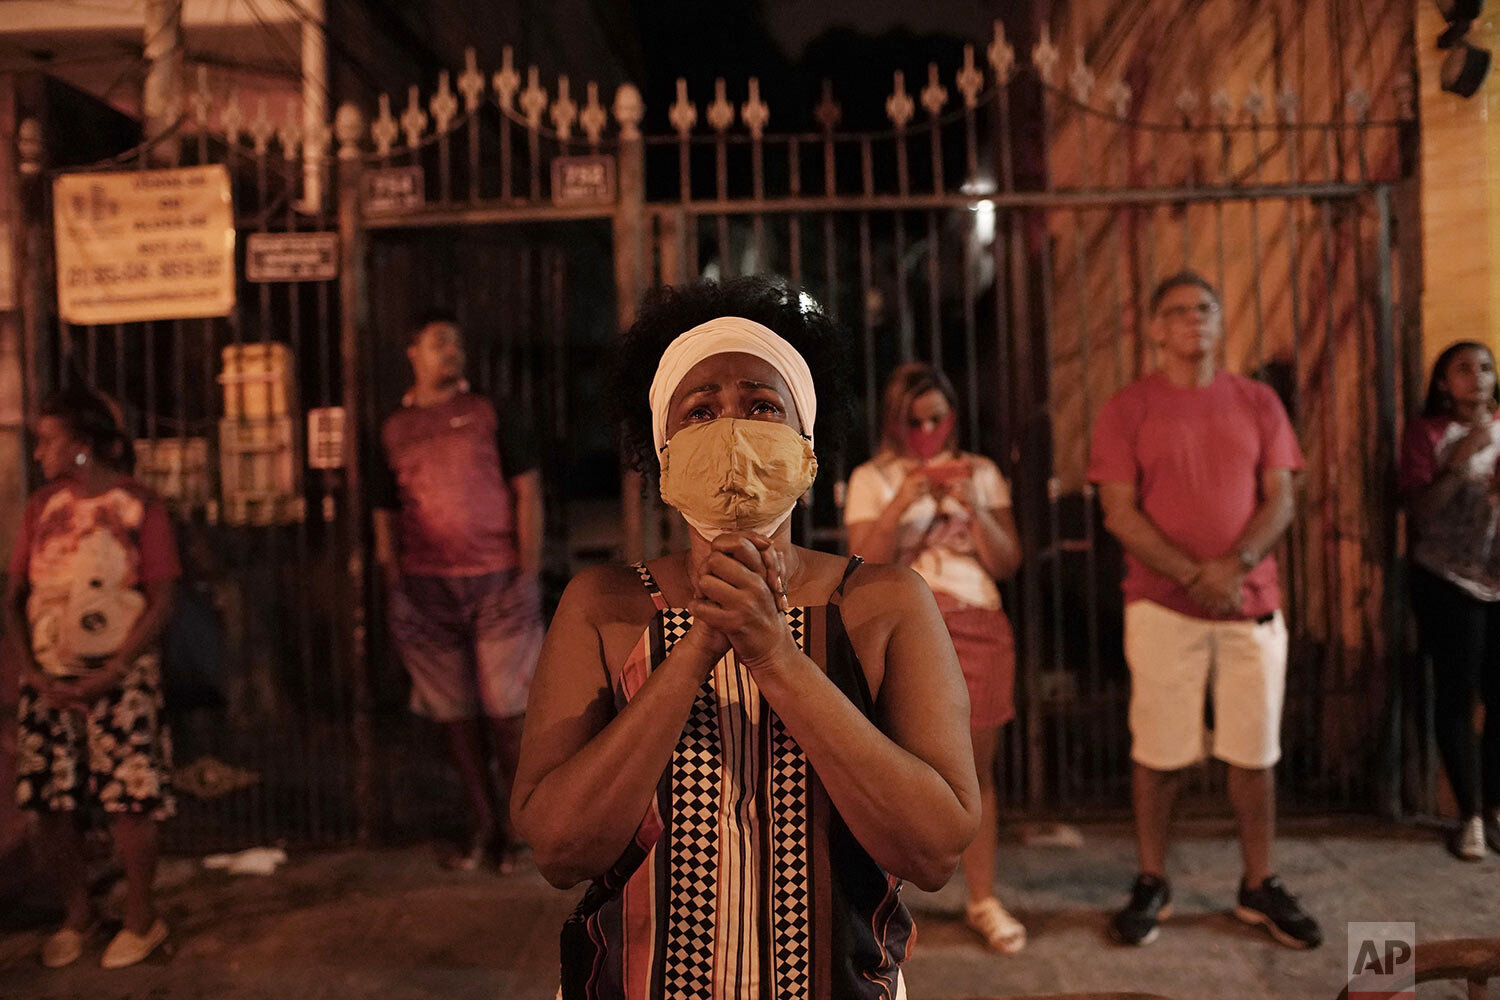  A woman wearing a mask as a precaution against the spread of the new coronavirus, prays illuminated by a street lamp outside the closed Saint George Church, to mark the feast day for Saint George, associated with bravery and resistance, in Rio de Ja